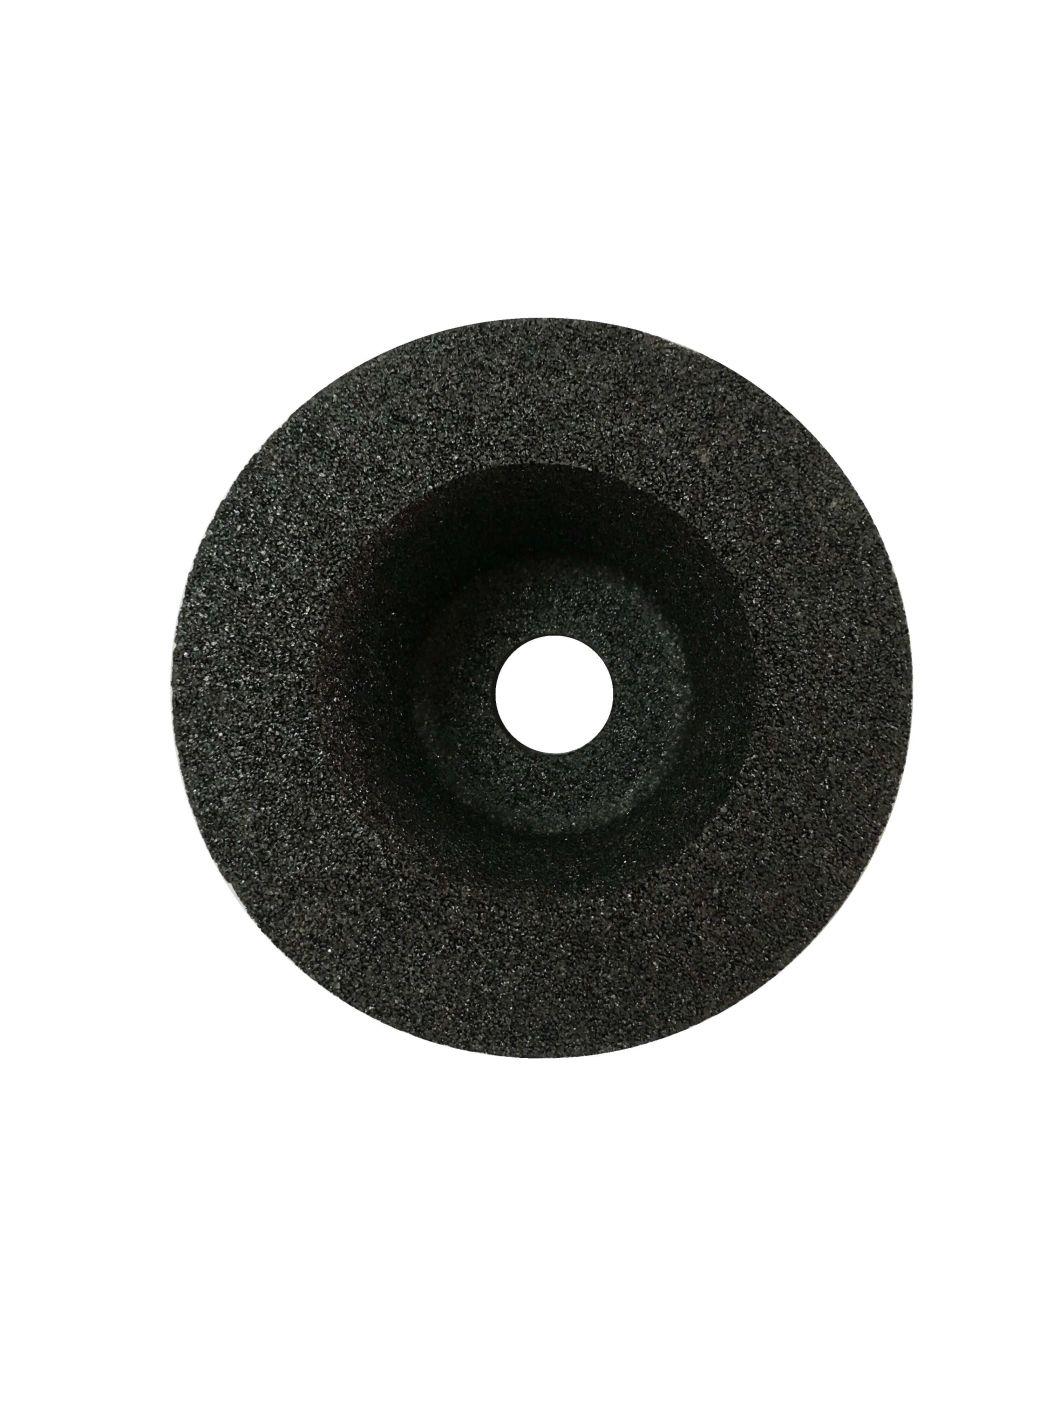 C24r Resin Bonded Abrasive Cup Stone